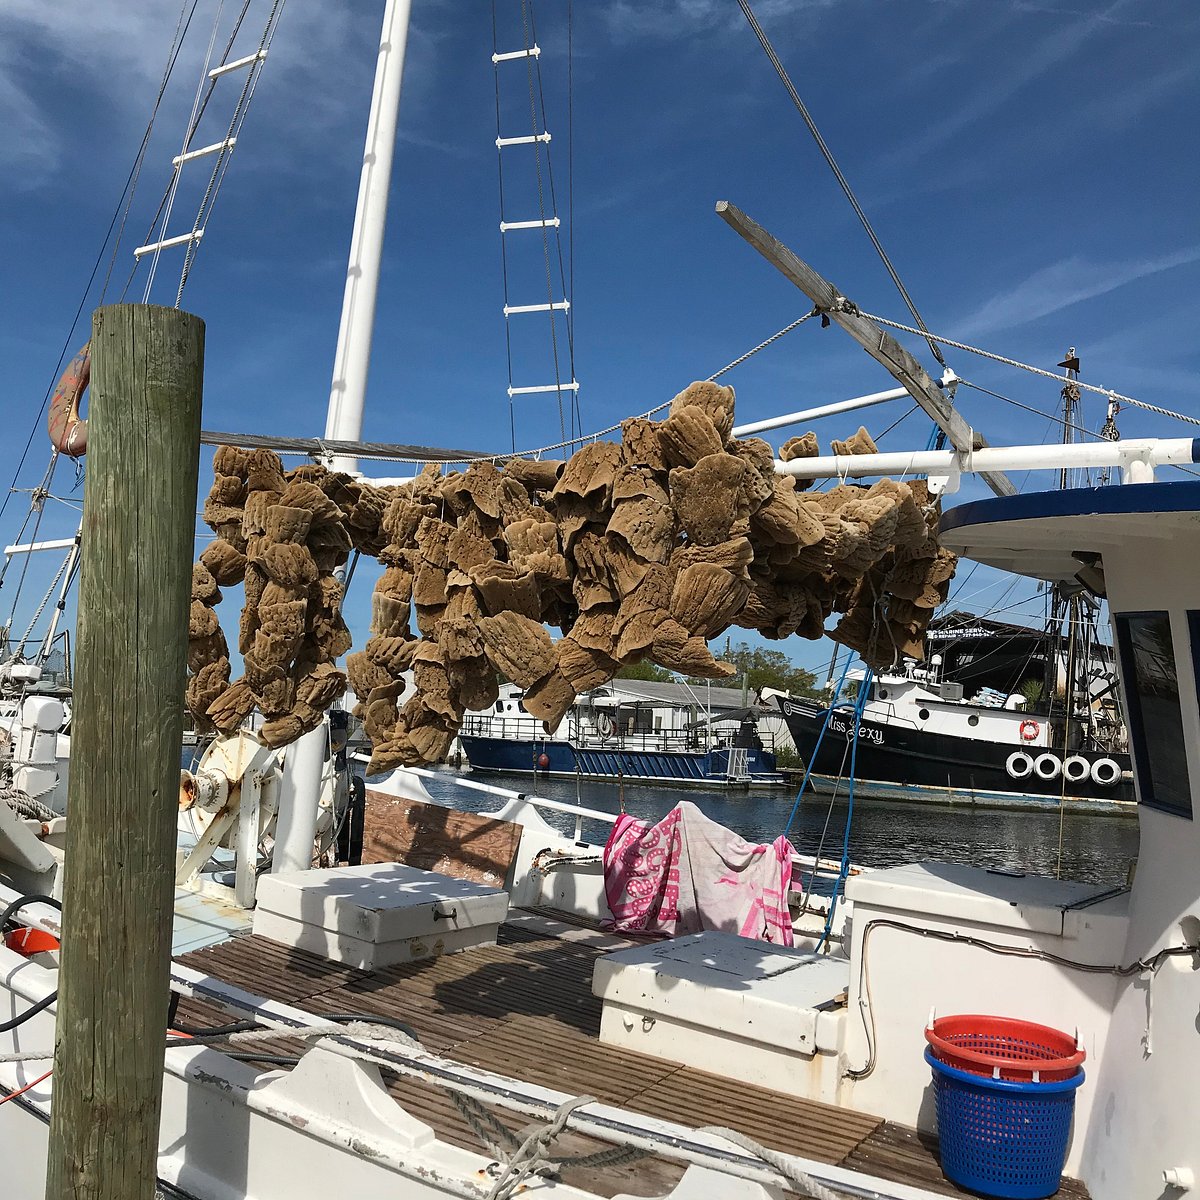 All 100+ Images tarpon springs sponge docks photos Completed